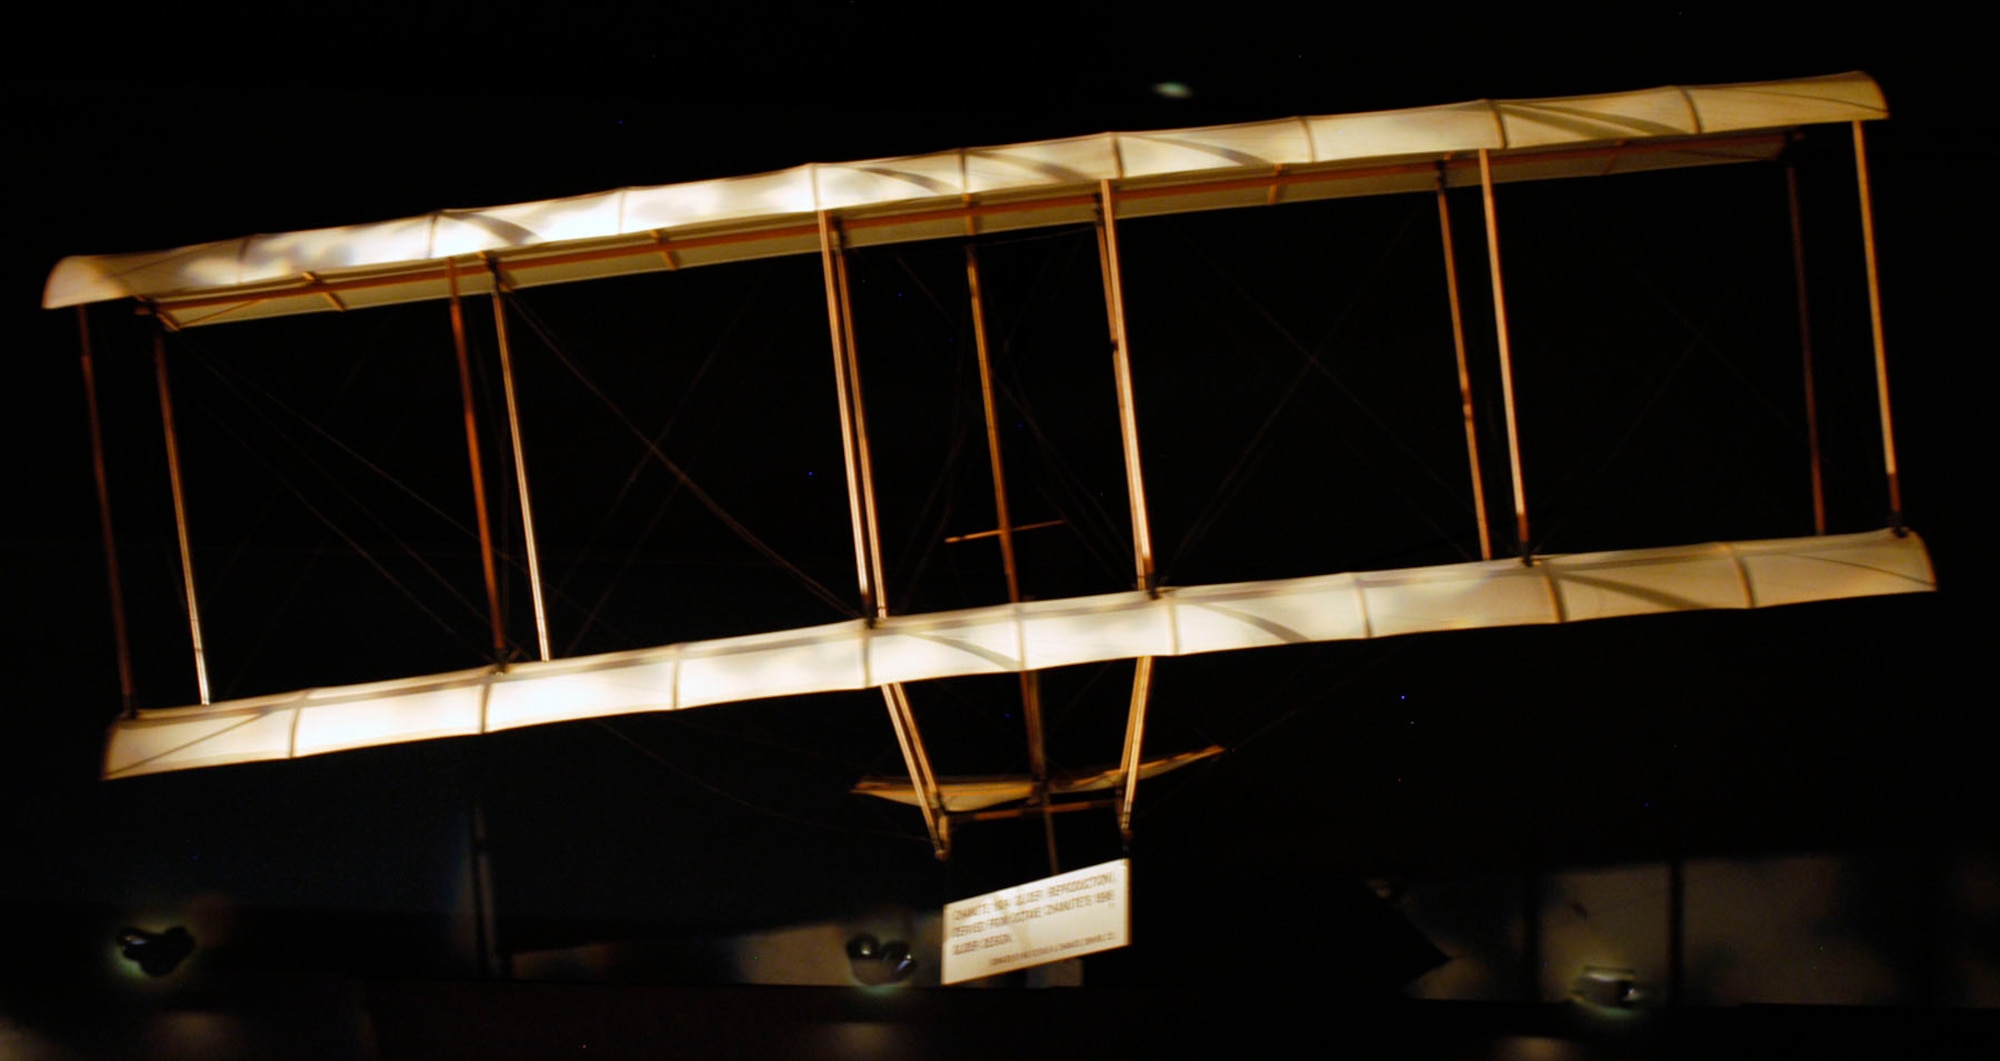 DAYTON, Ohio -- Reproduction of Octave Chanute's glider in the Early Years Gallery at the National Museum of the United States Air Force. (U.S. Air Force photo)